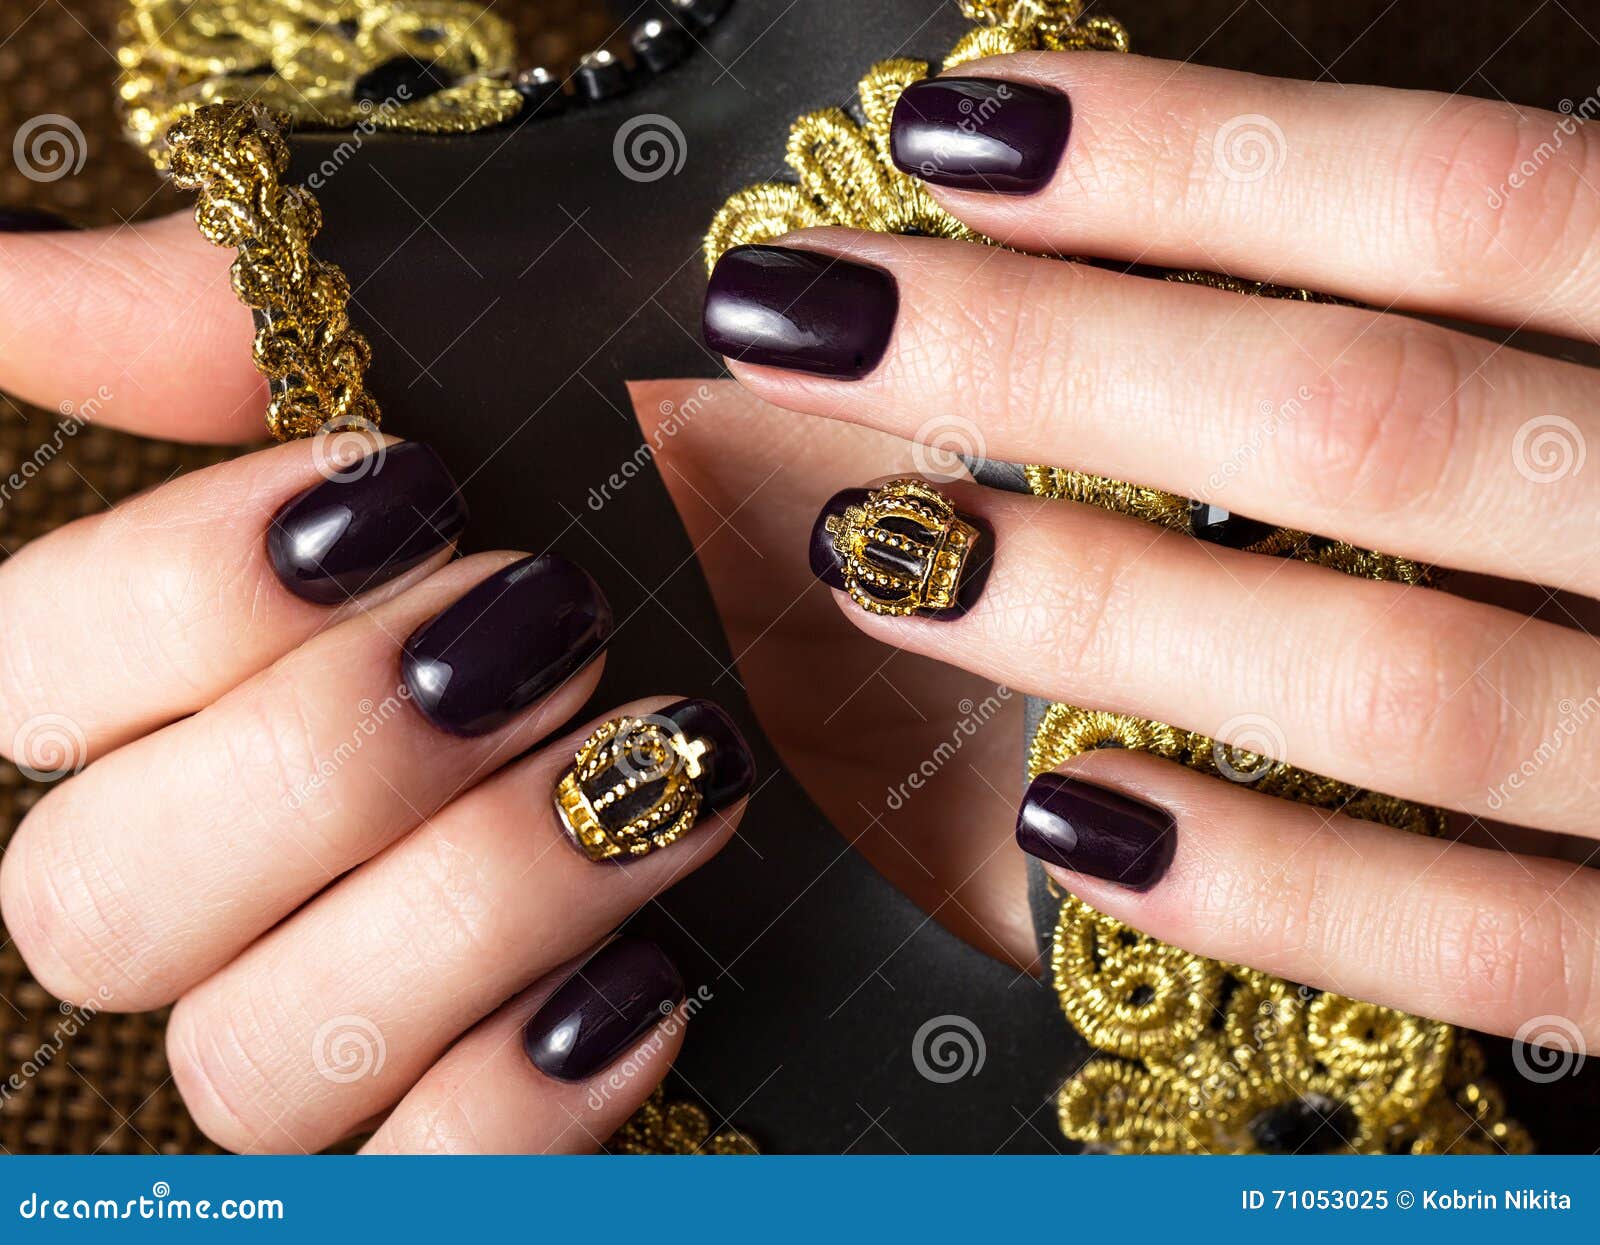 Black Female Manicure Nails Closeup with Crown Stock Image - Image of ...